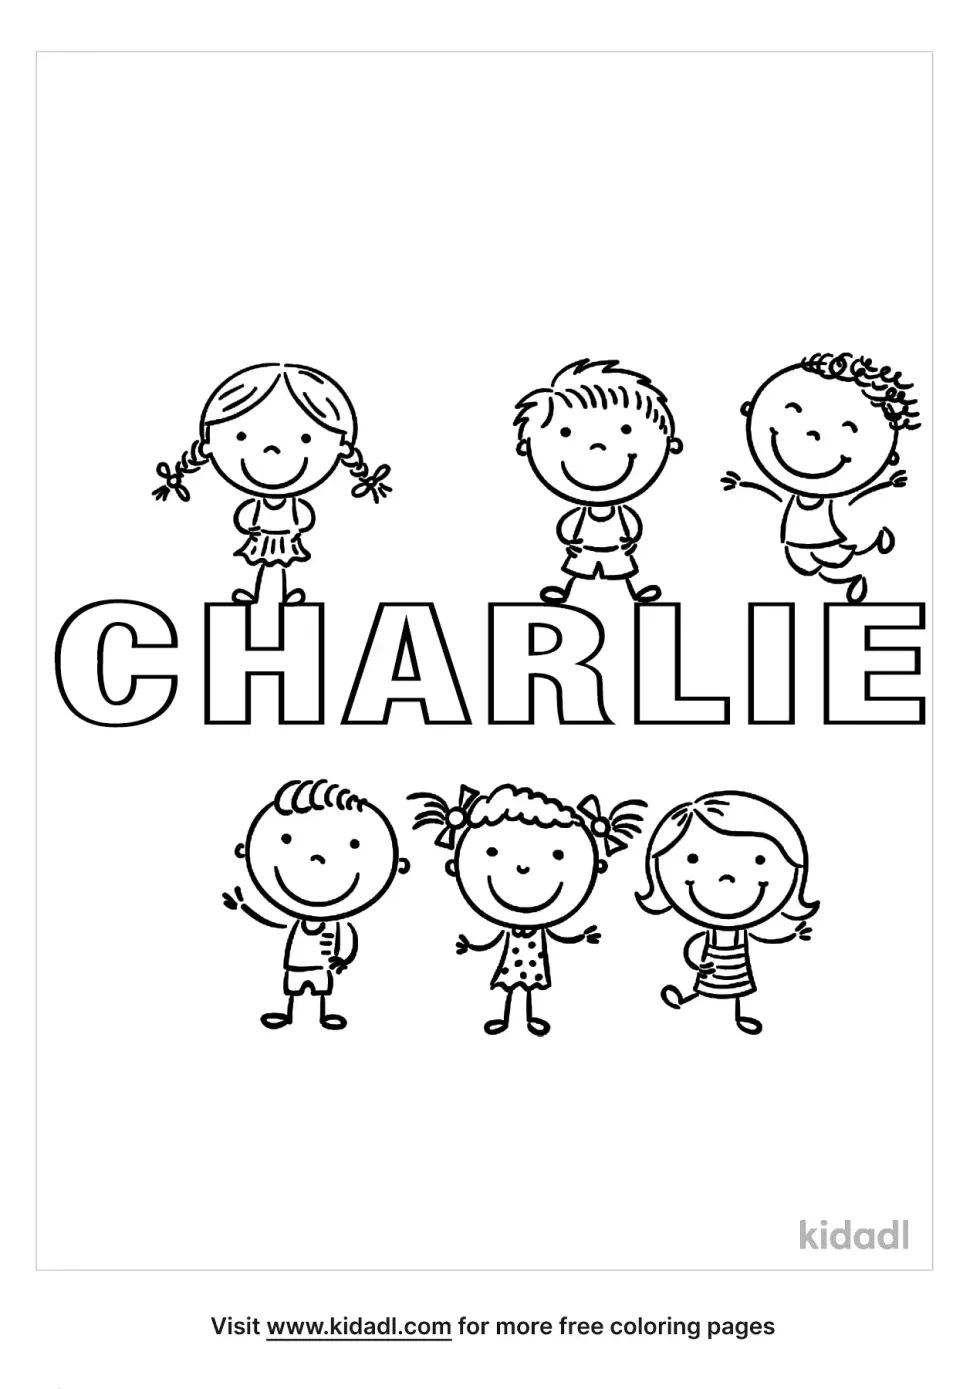 Charlie Name Coloring Page